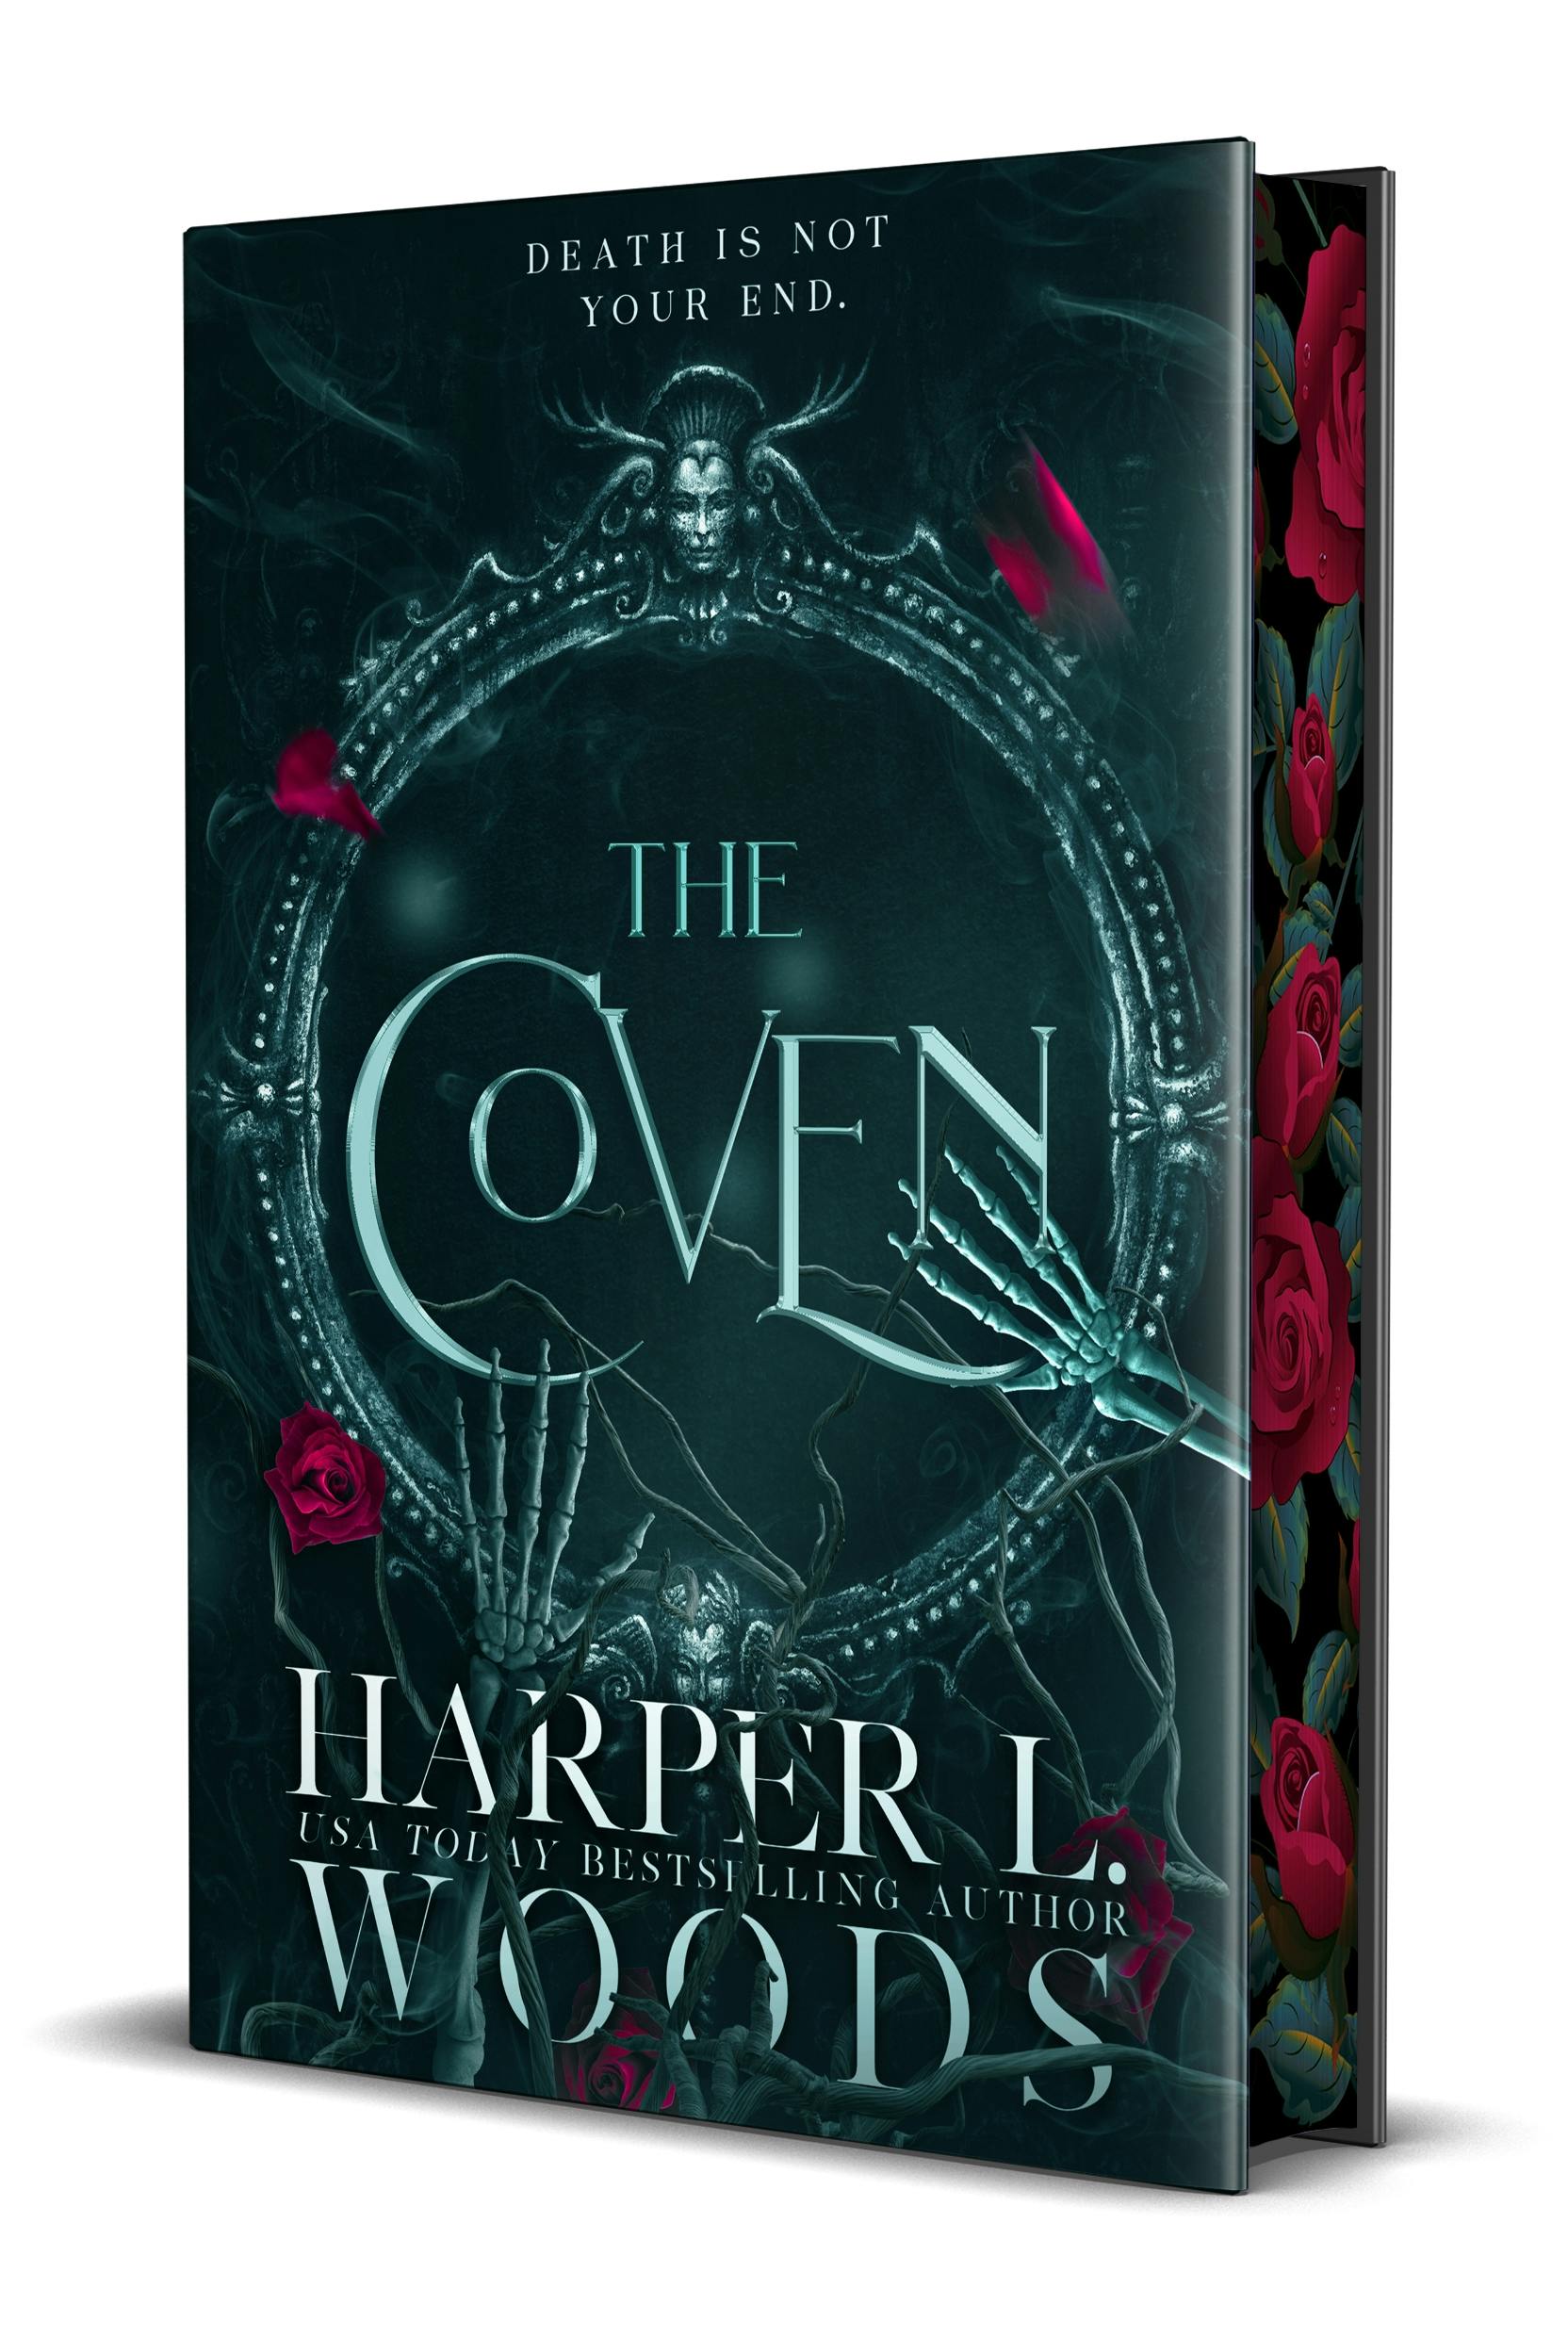 Cover for the book titled as: The Coven